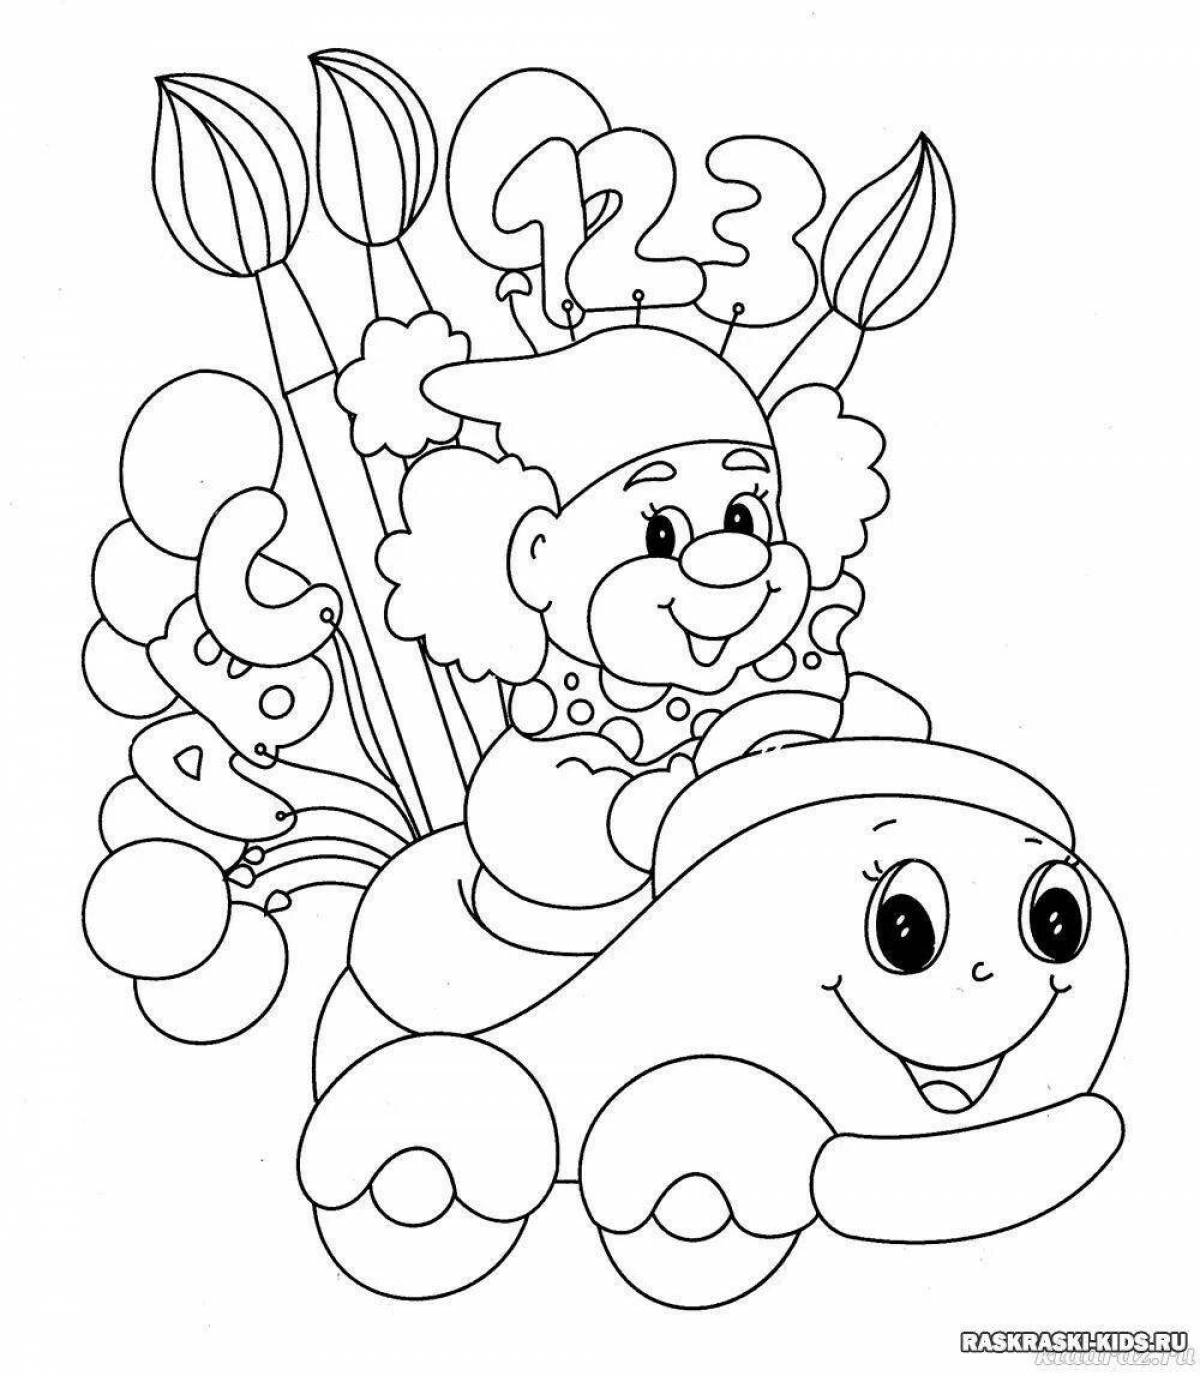 Coloring book for kindergarten 4-5 years old